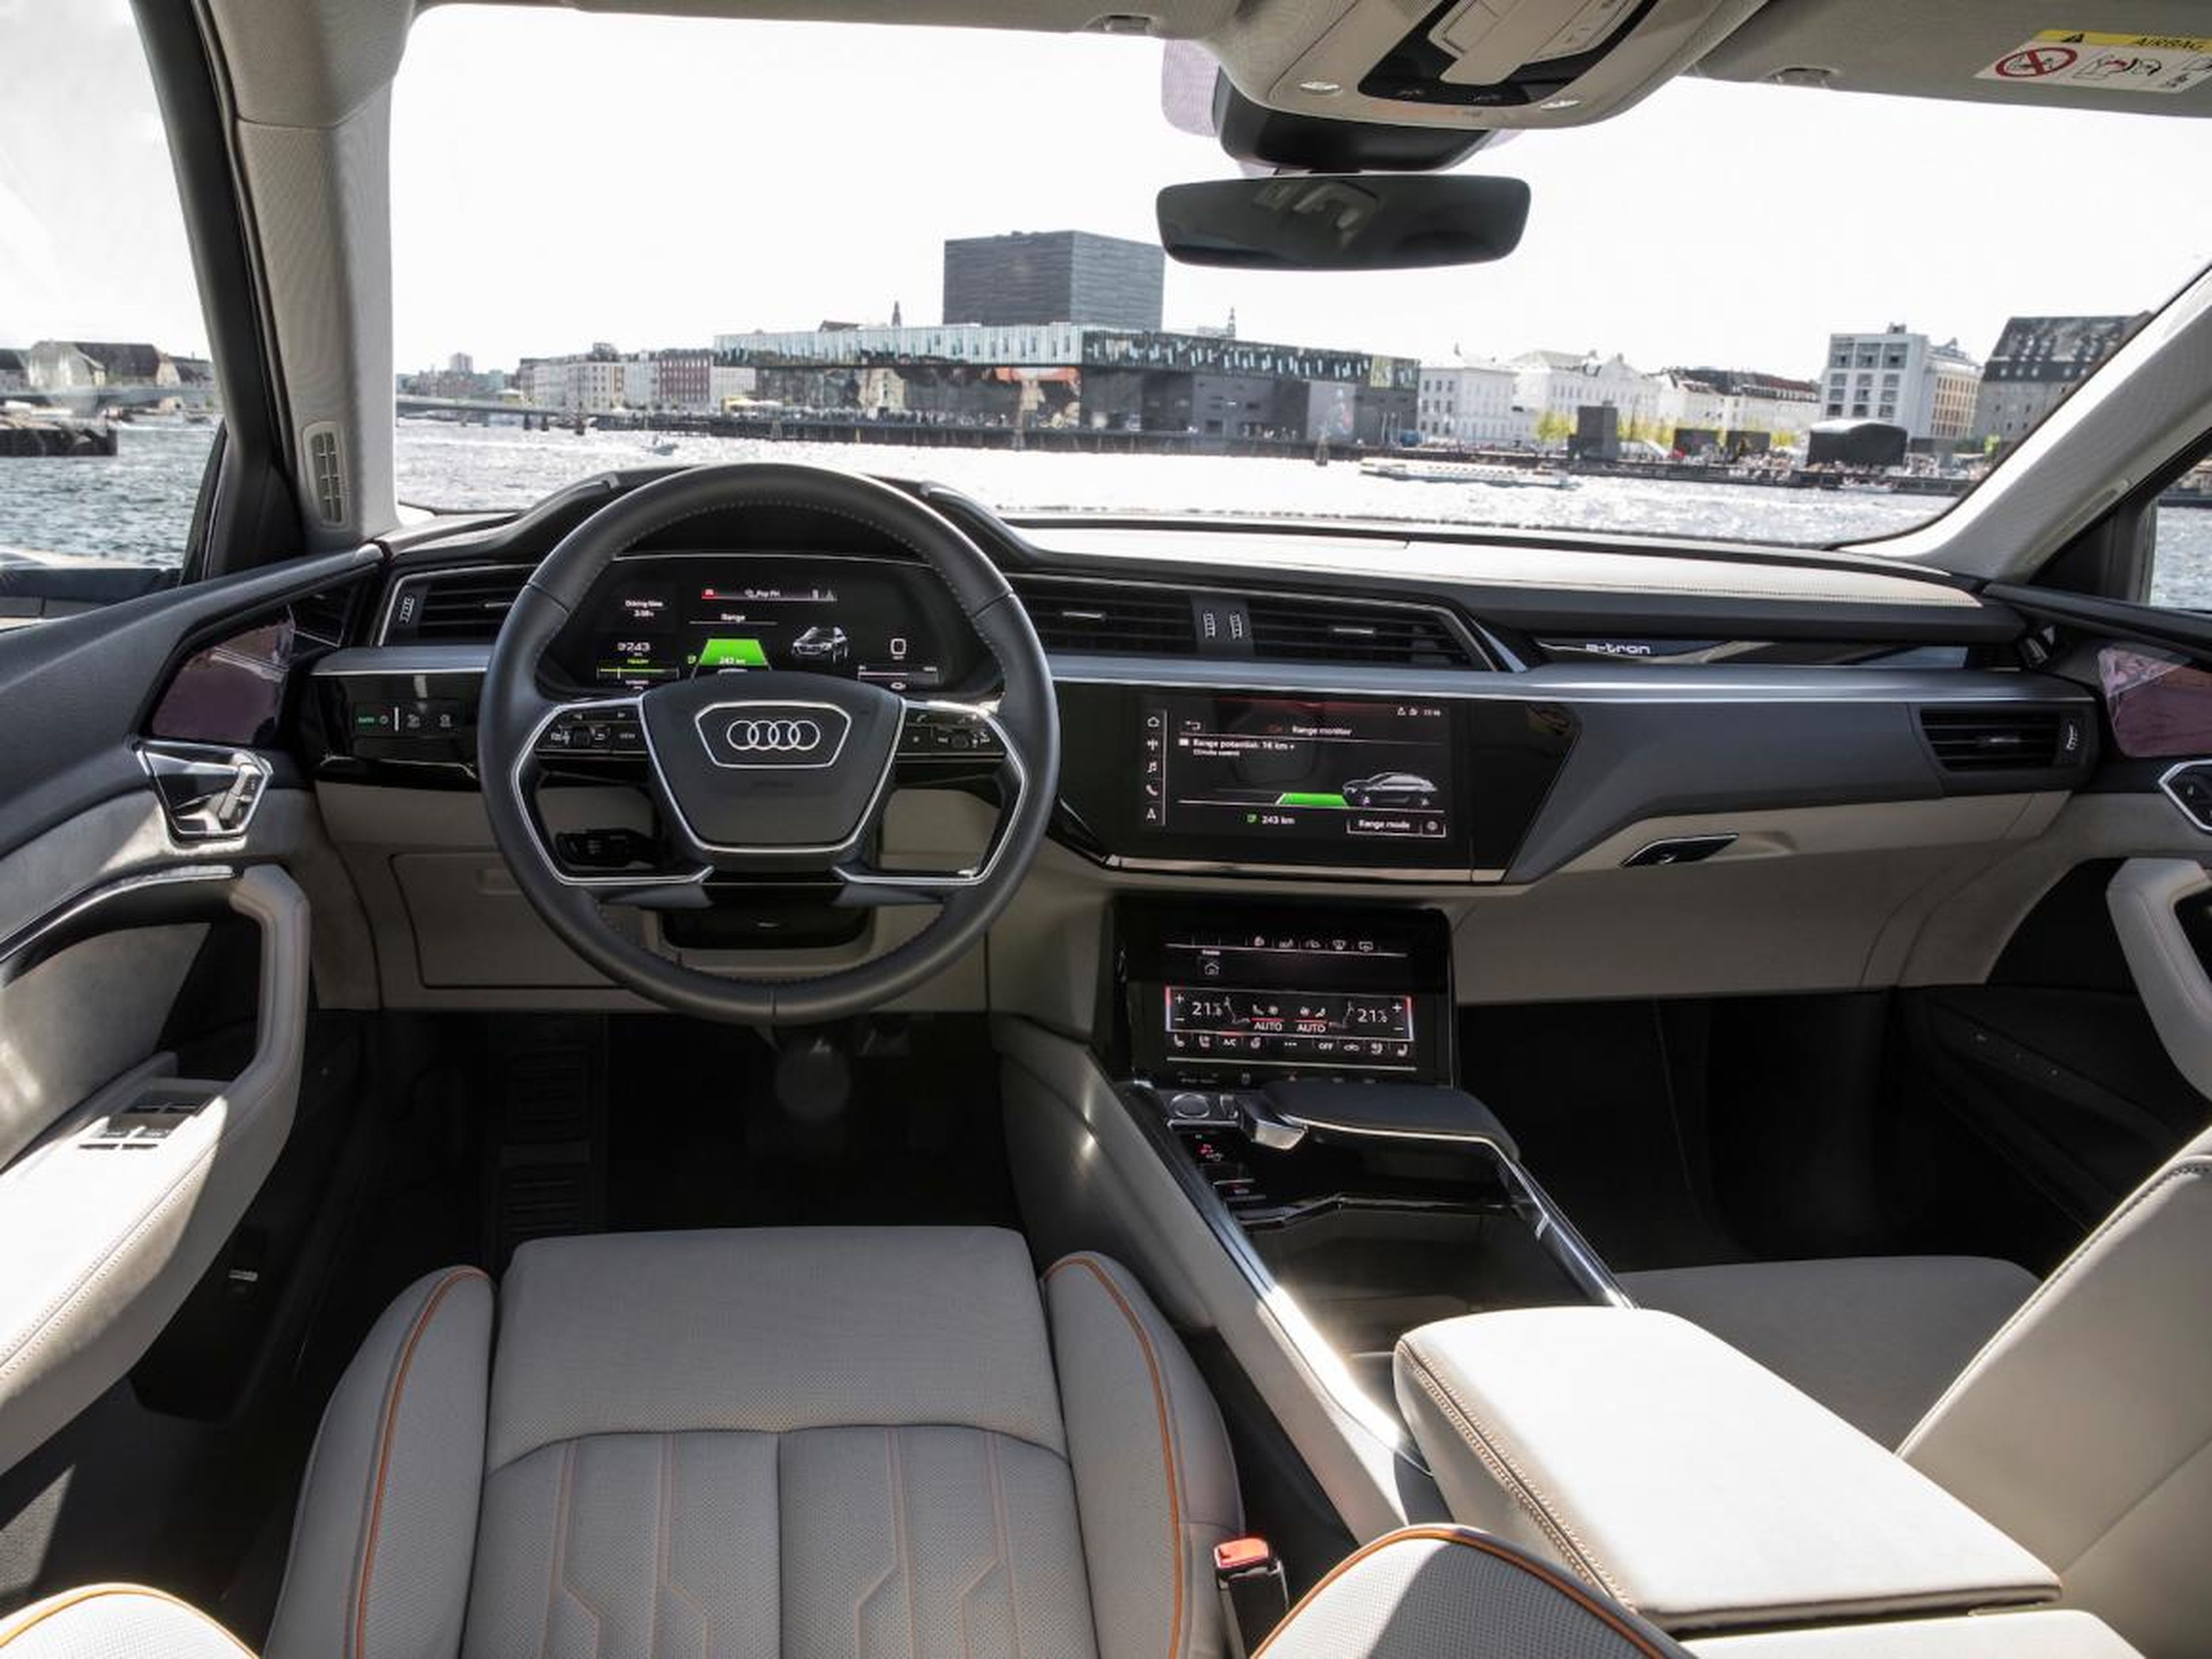 The e-tron will have just under 250 miles of range, Audi says.